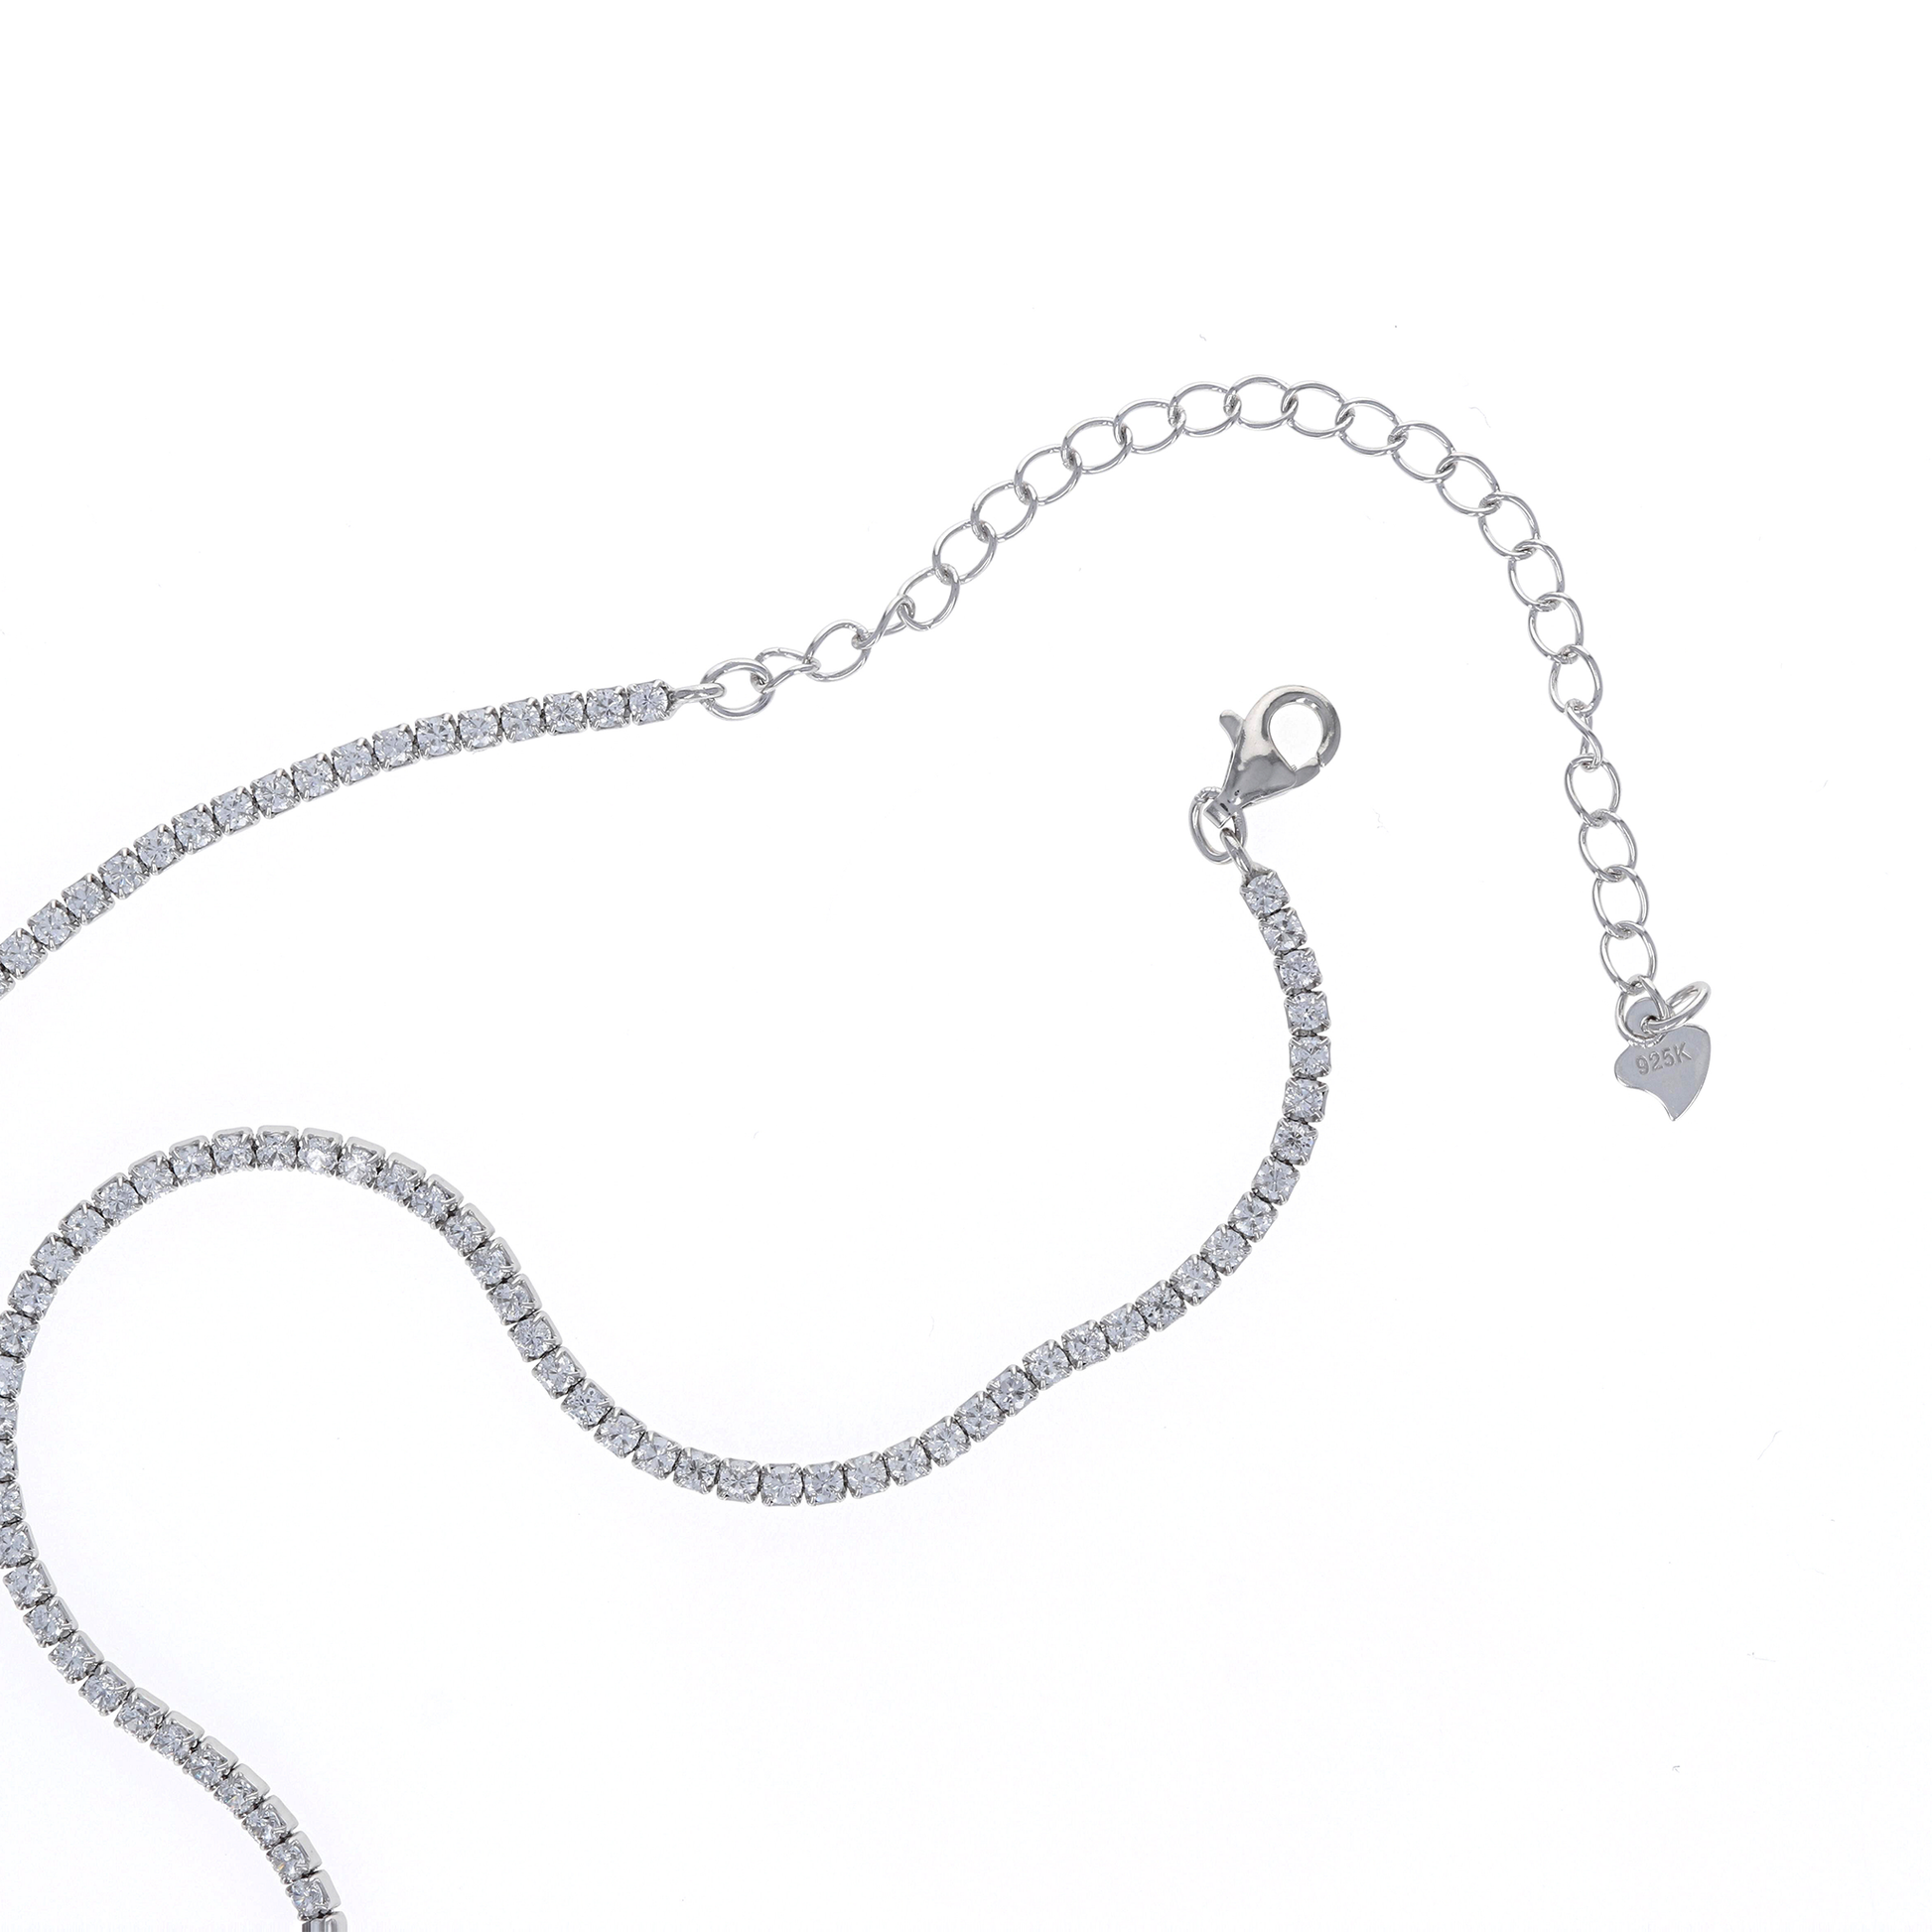 Thin silver adjustable short necklace - Alexandra Marks Jewelry